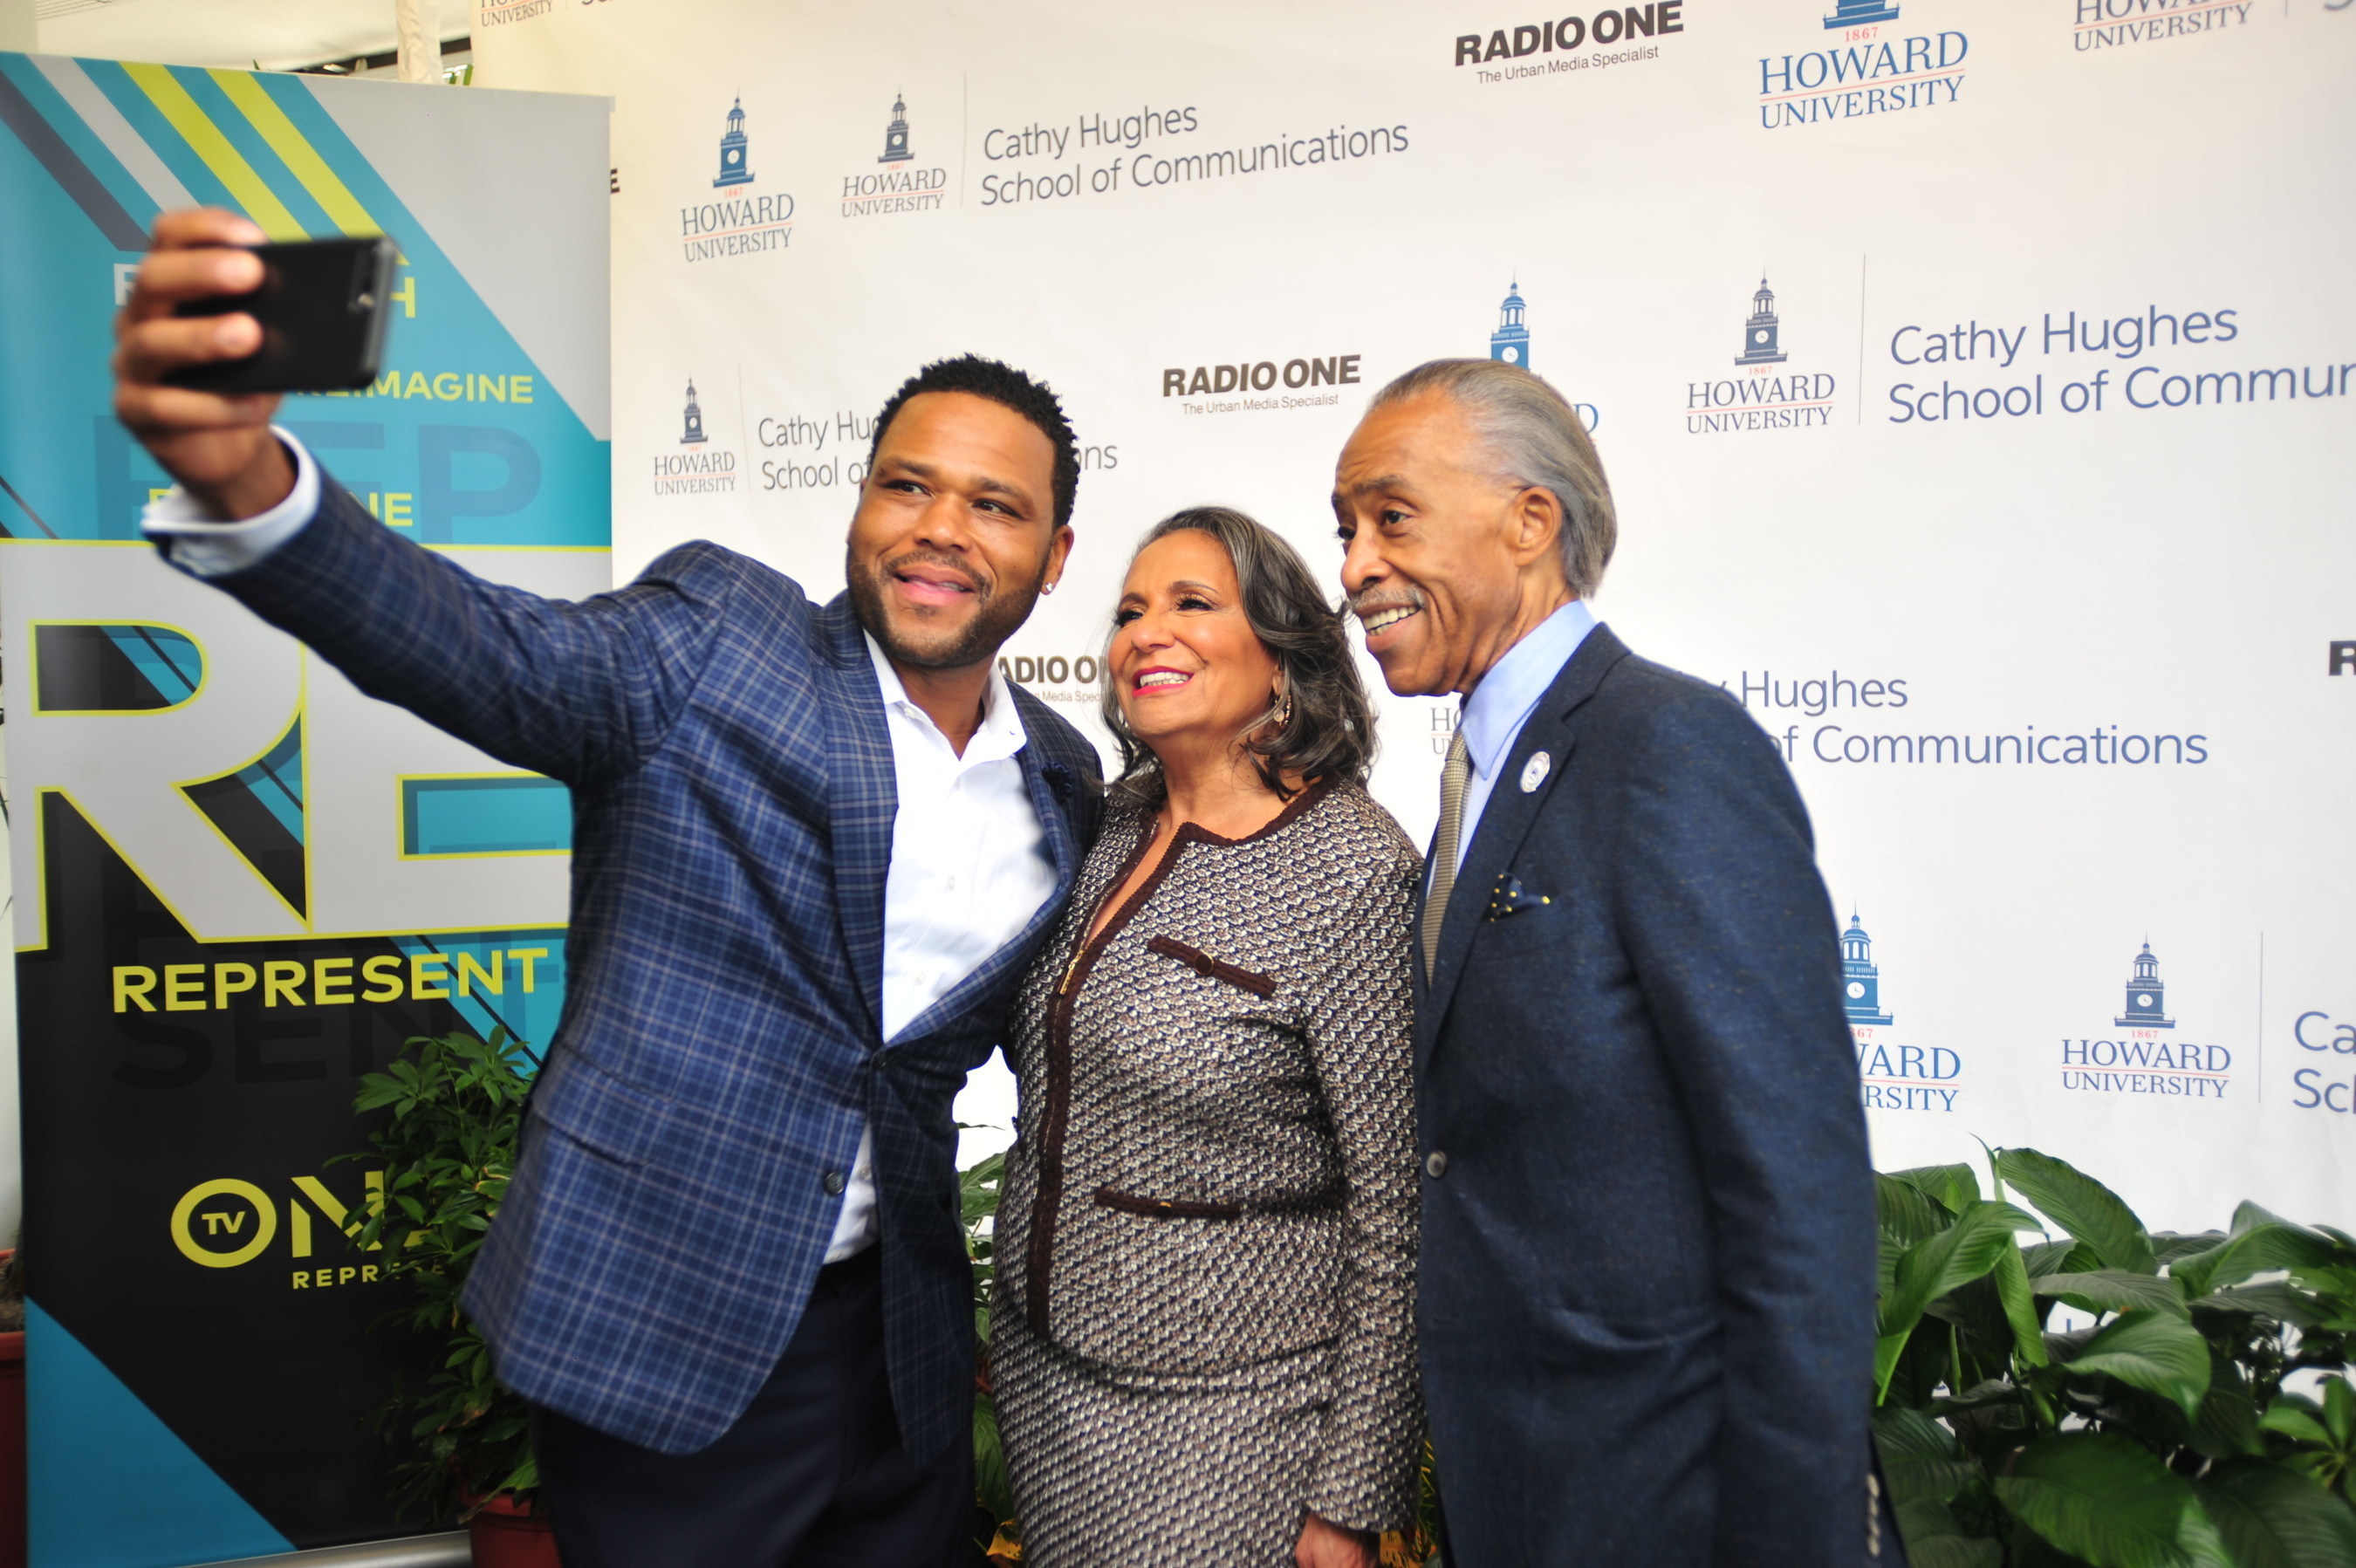 Award-winning Actor Anthony Anderson, Radio One, Inc. Founder and Chairperson Cathy Hughes, and Civil Rights Activist and Television Host Rev. Al Sharpton at the Cathy Hughes School of Communications at Howard University Celebratory Brunch at Howard University on Sunday October 23, 2016 in Washington.